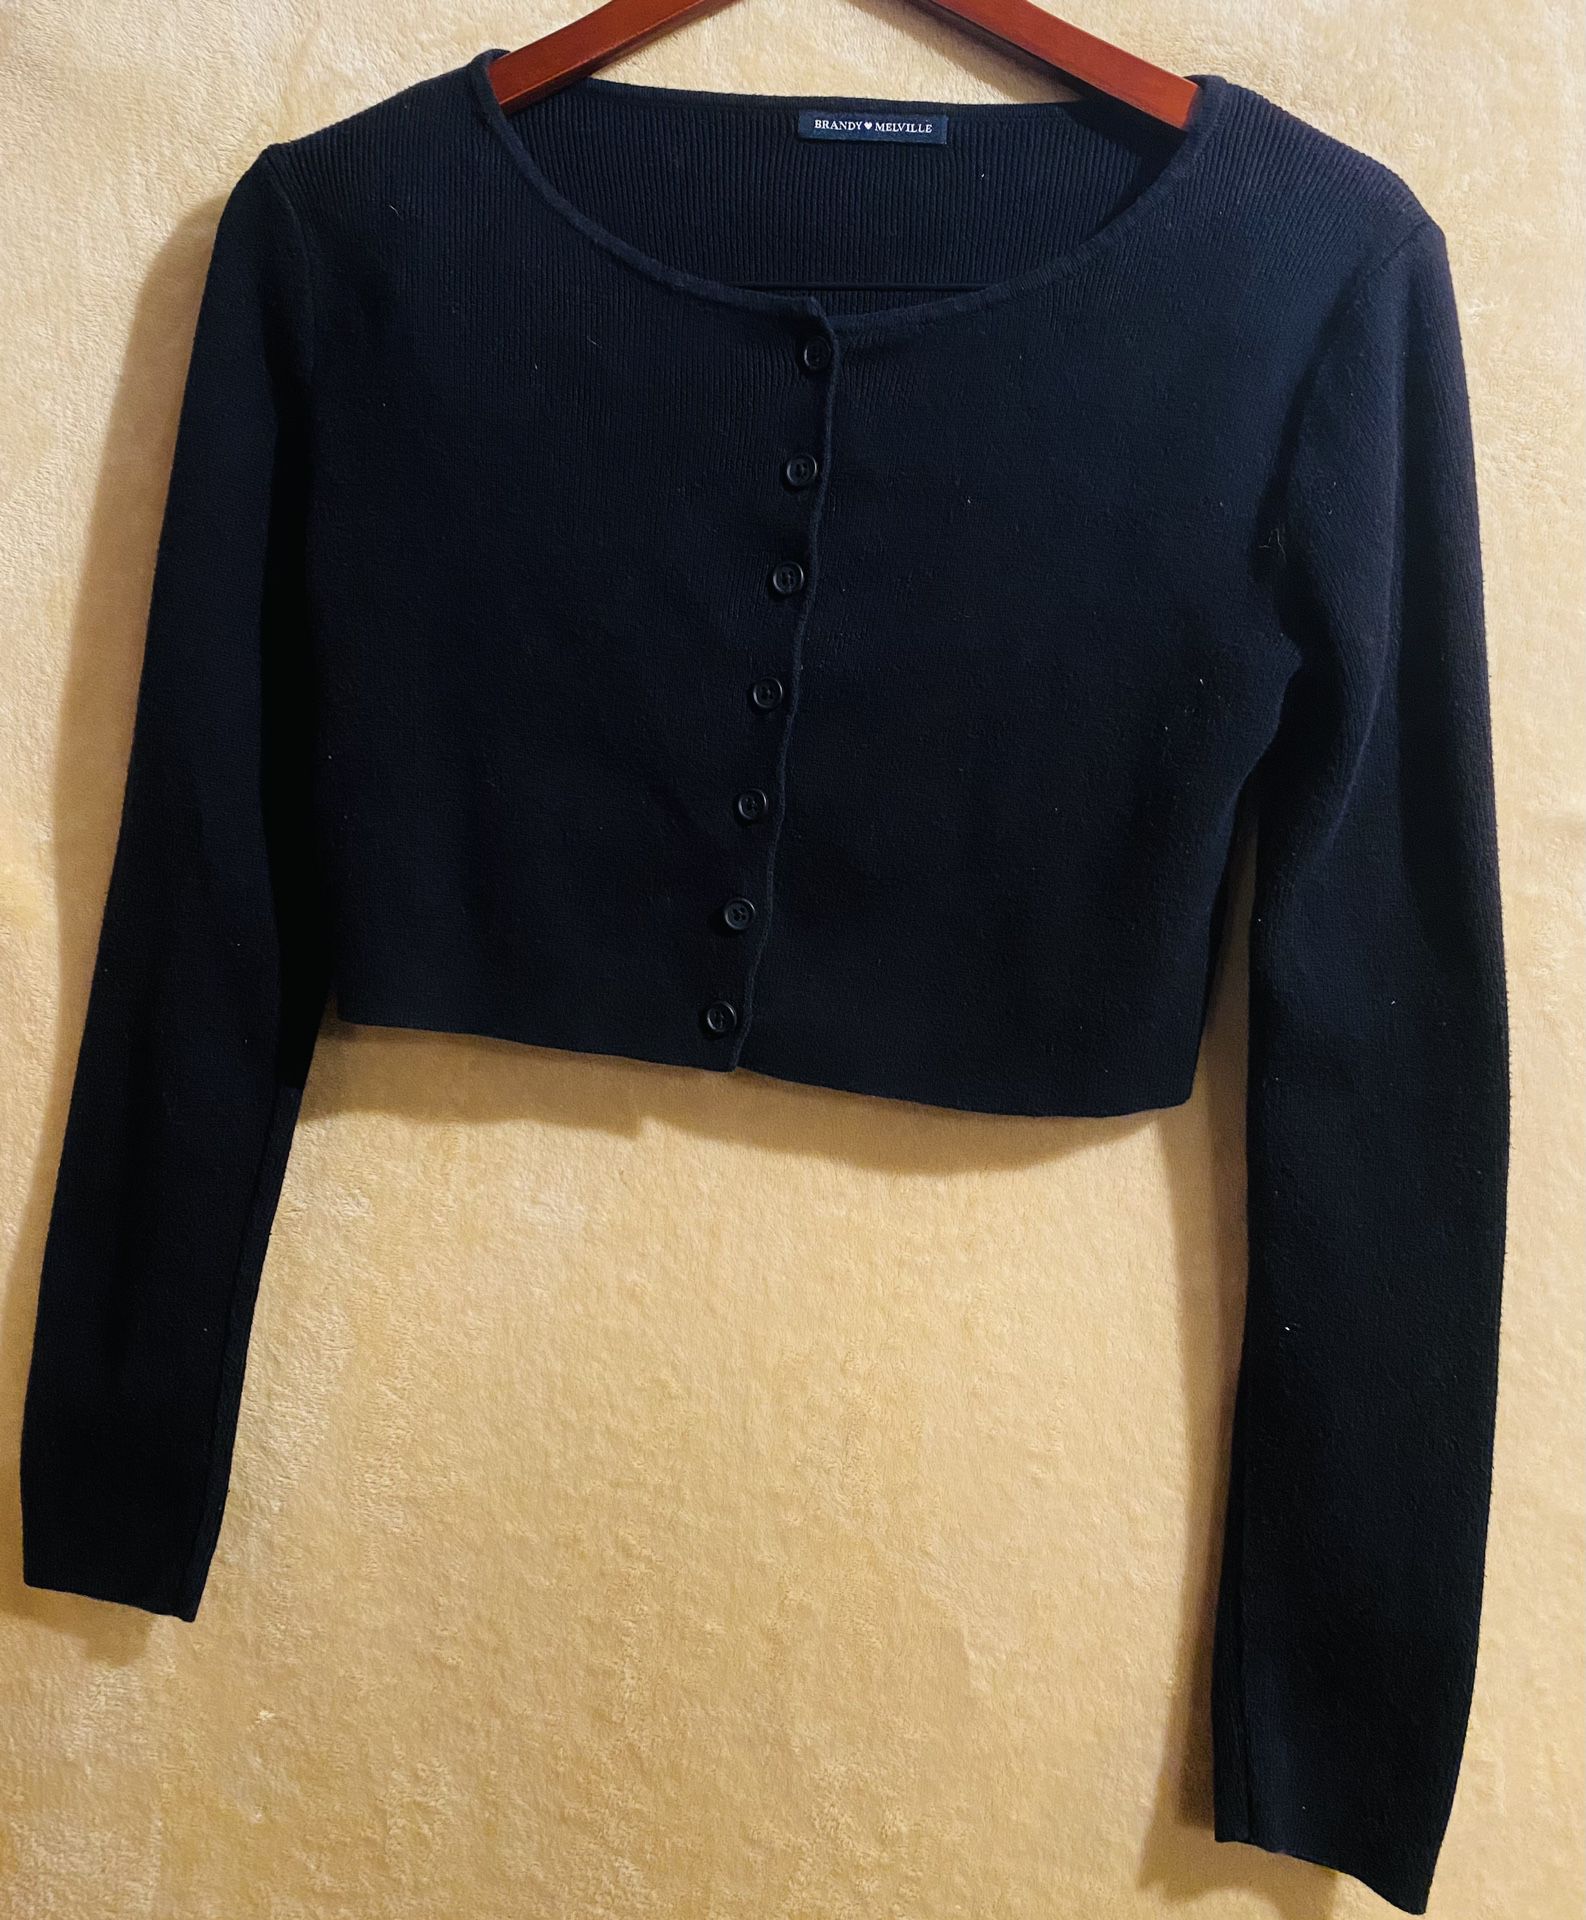 Brandy Melville~Cardigan cropped black one size